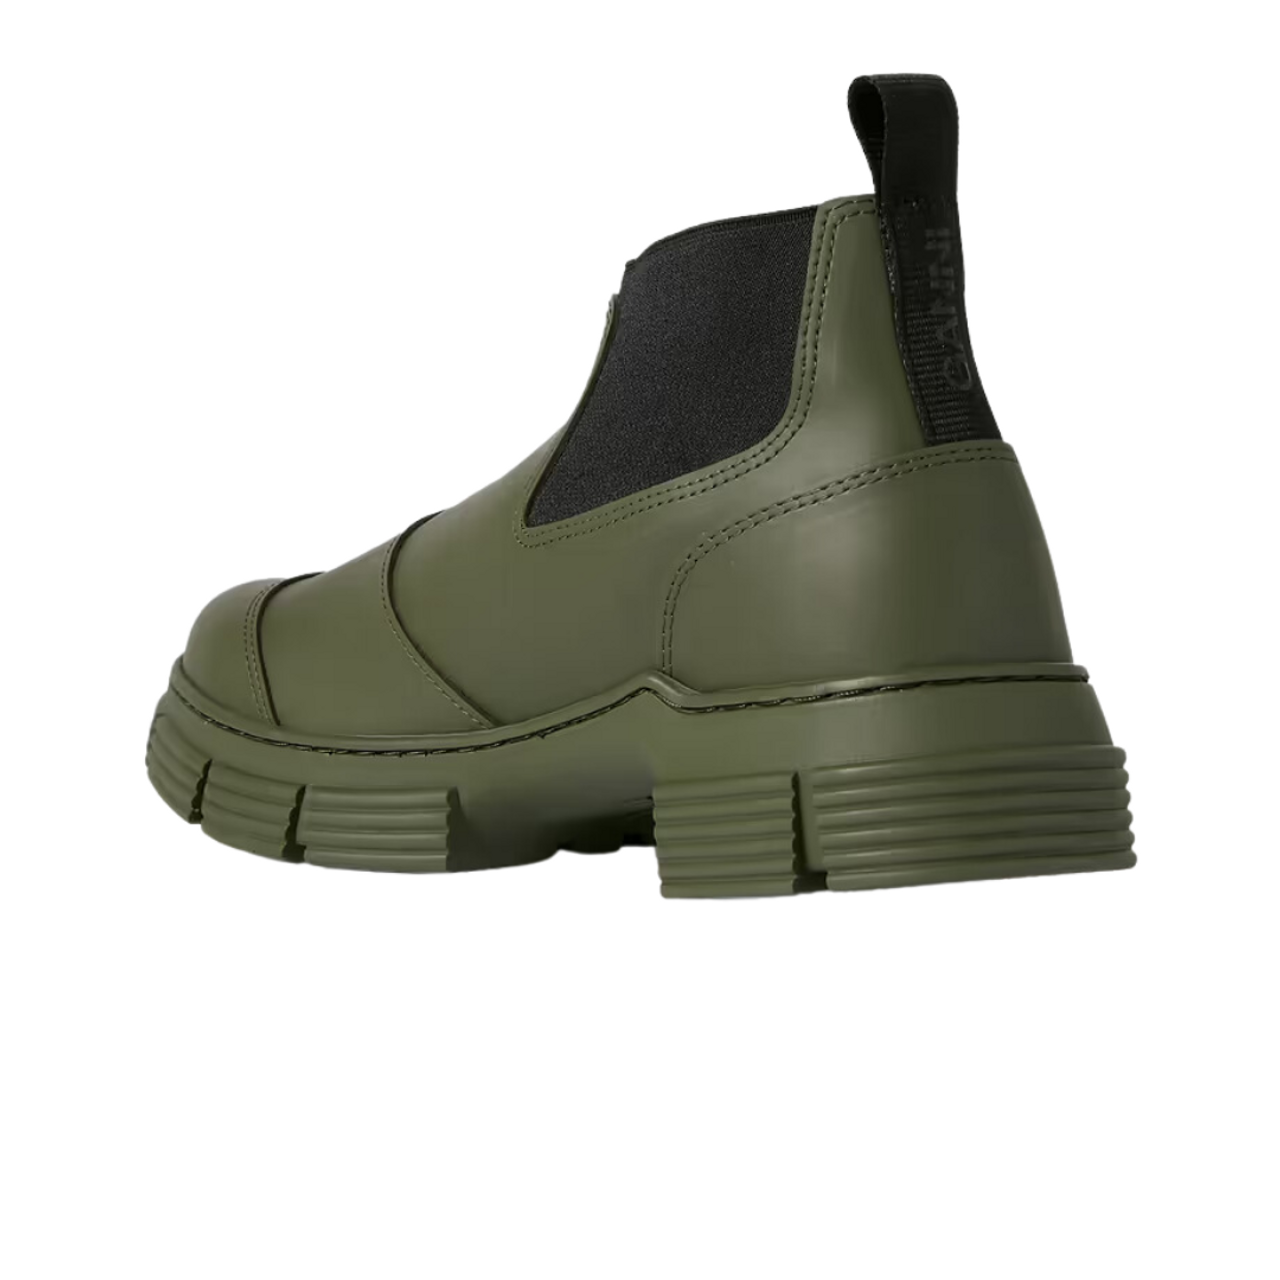 Ganni Recycled Rubber Crop City Boot in Kalamata